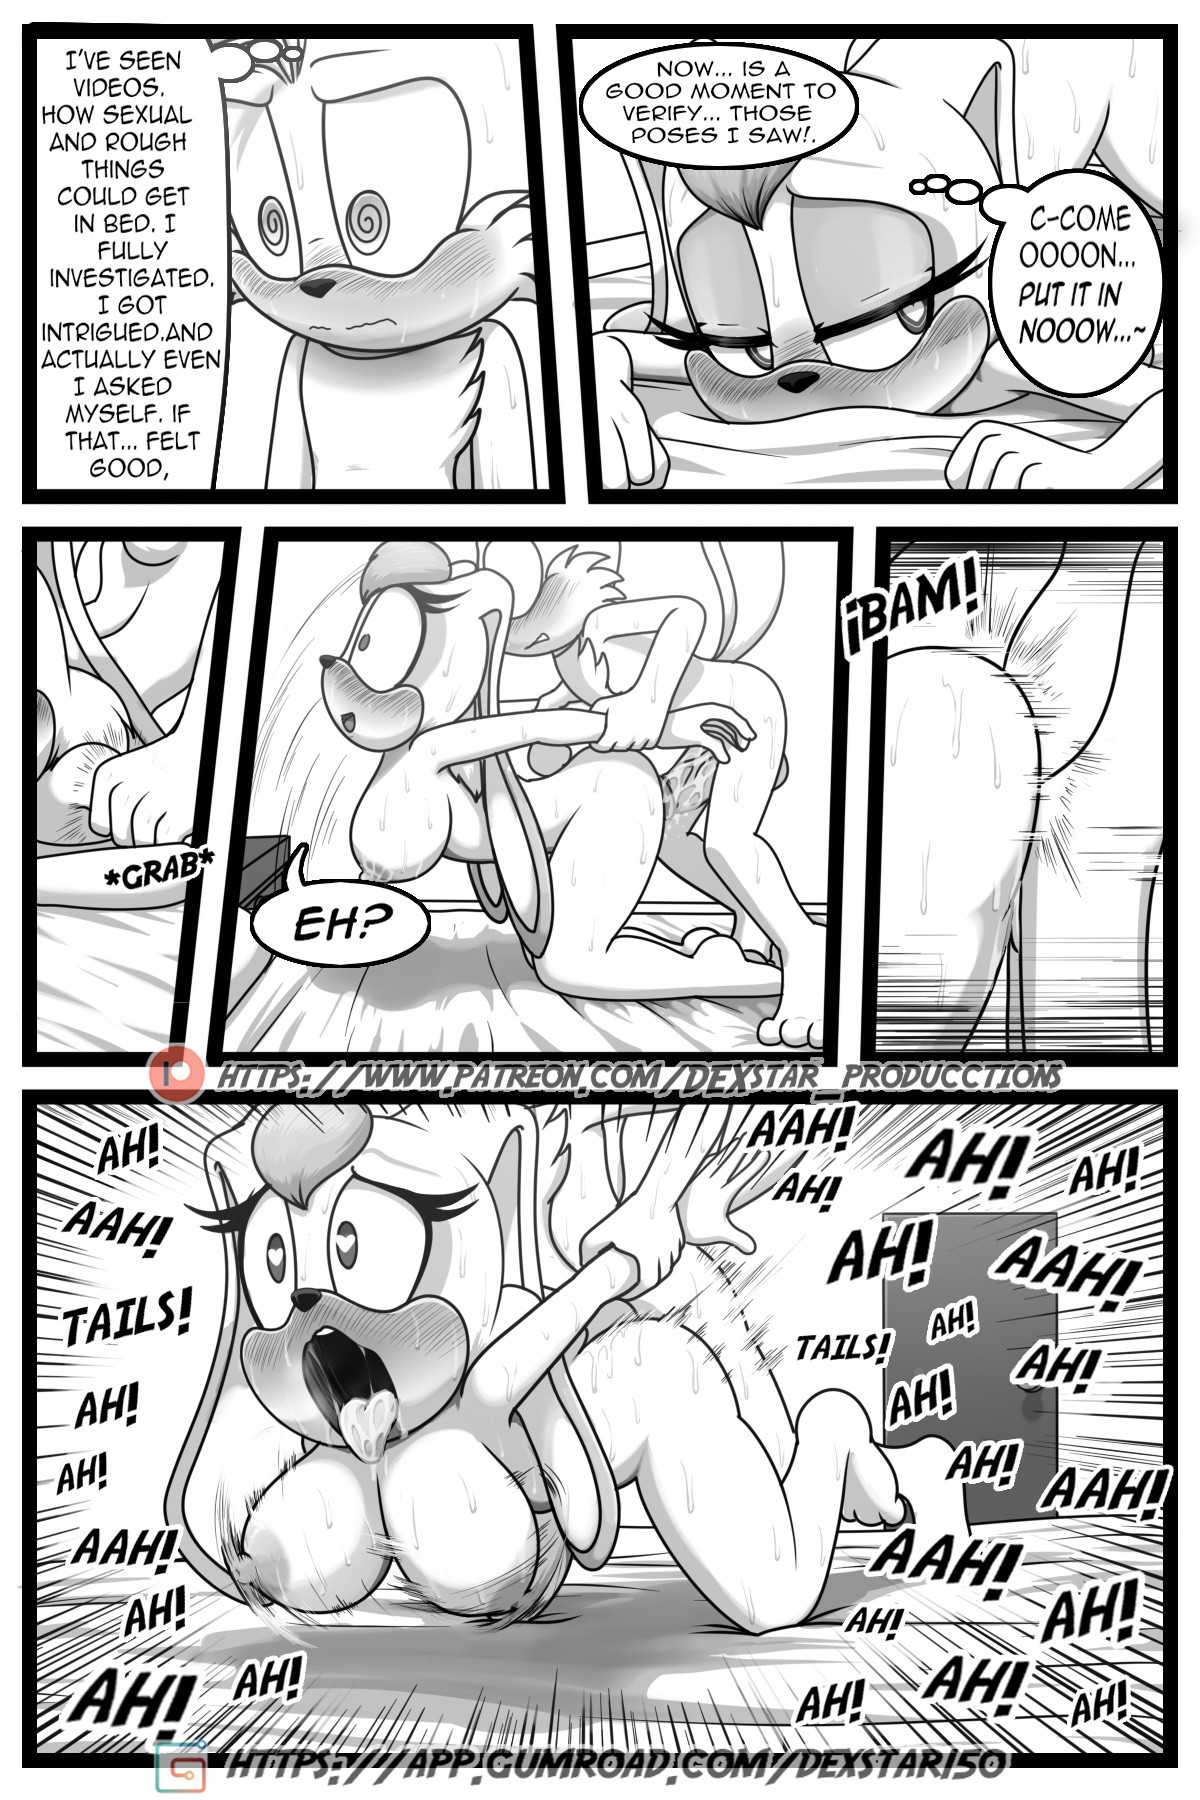 PLEASE FUCK ME - Cream x Tail (Extra Story!) porn comic picture 17